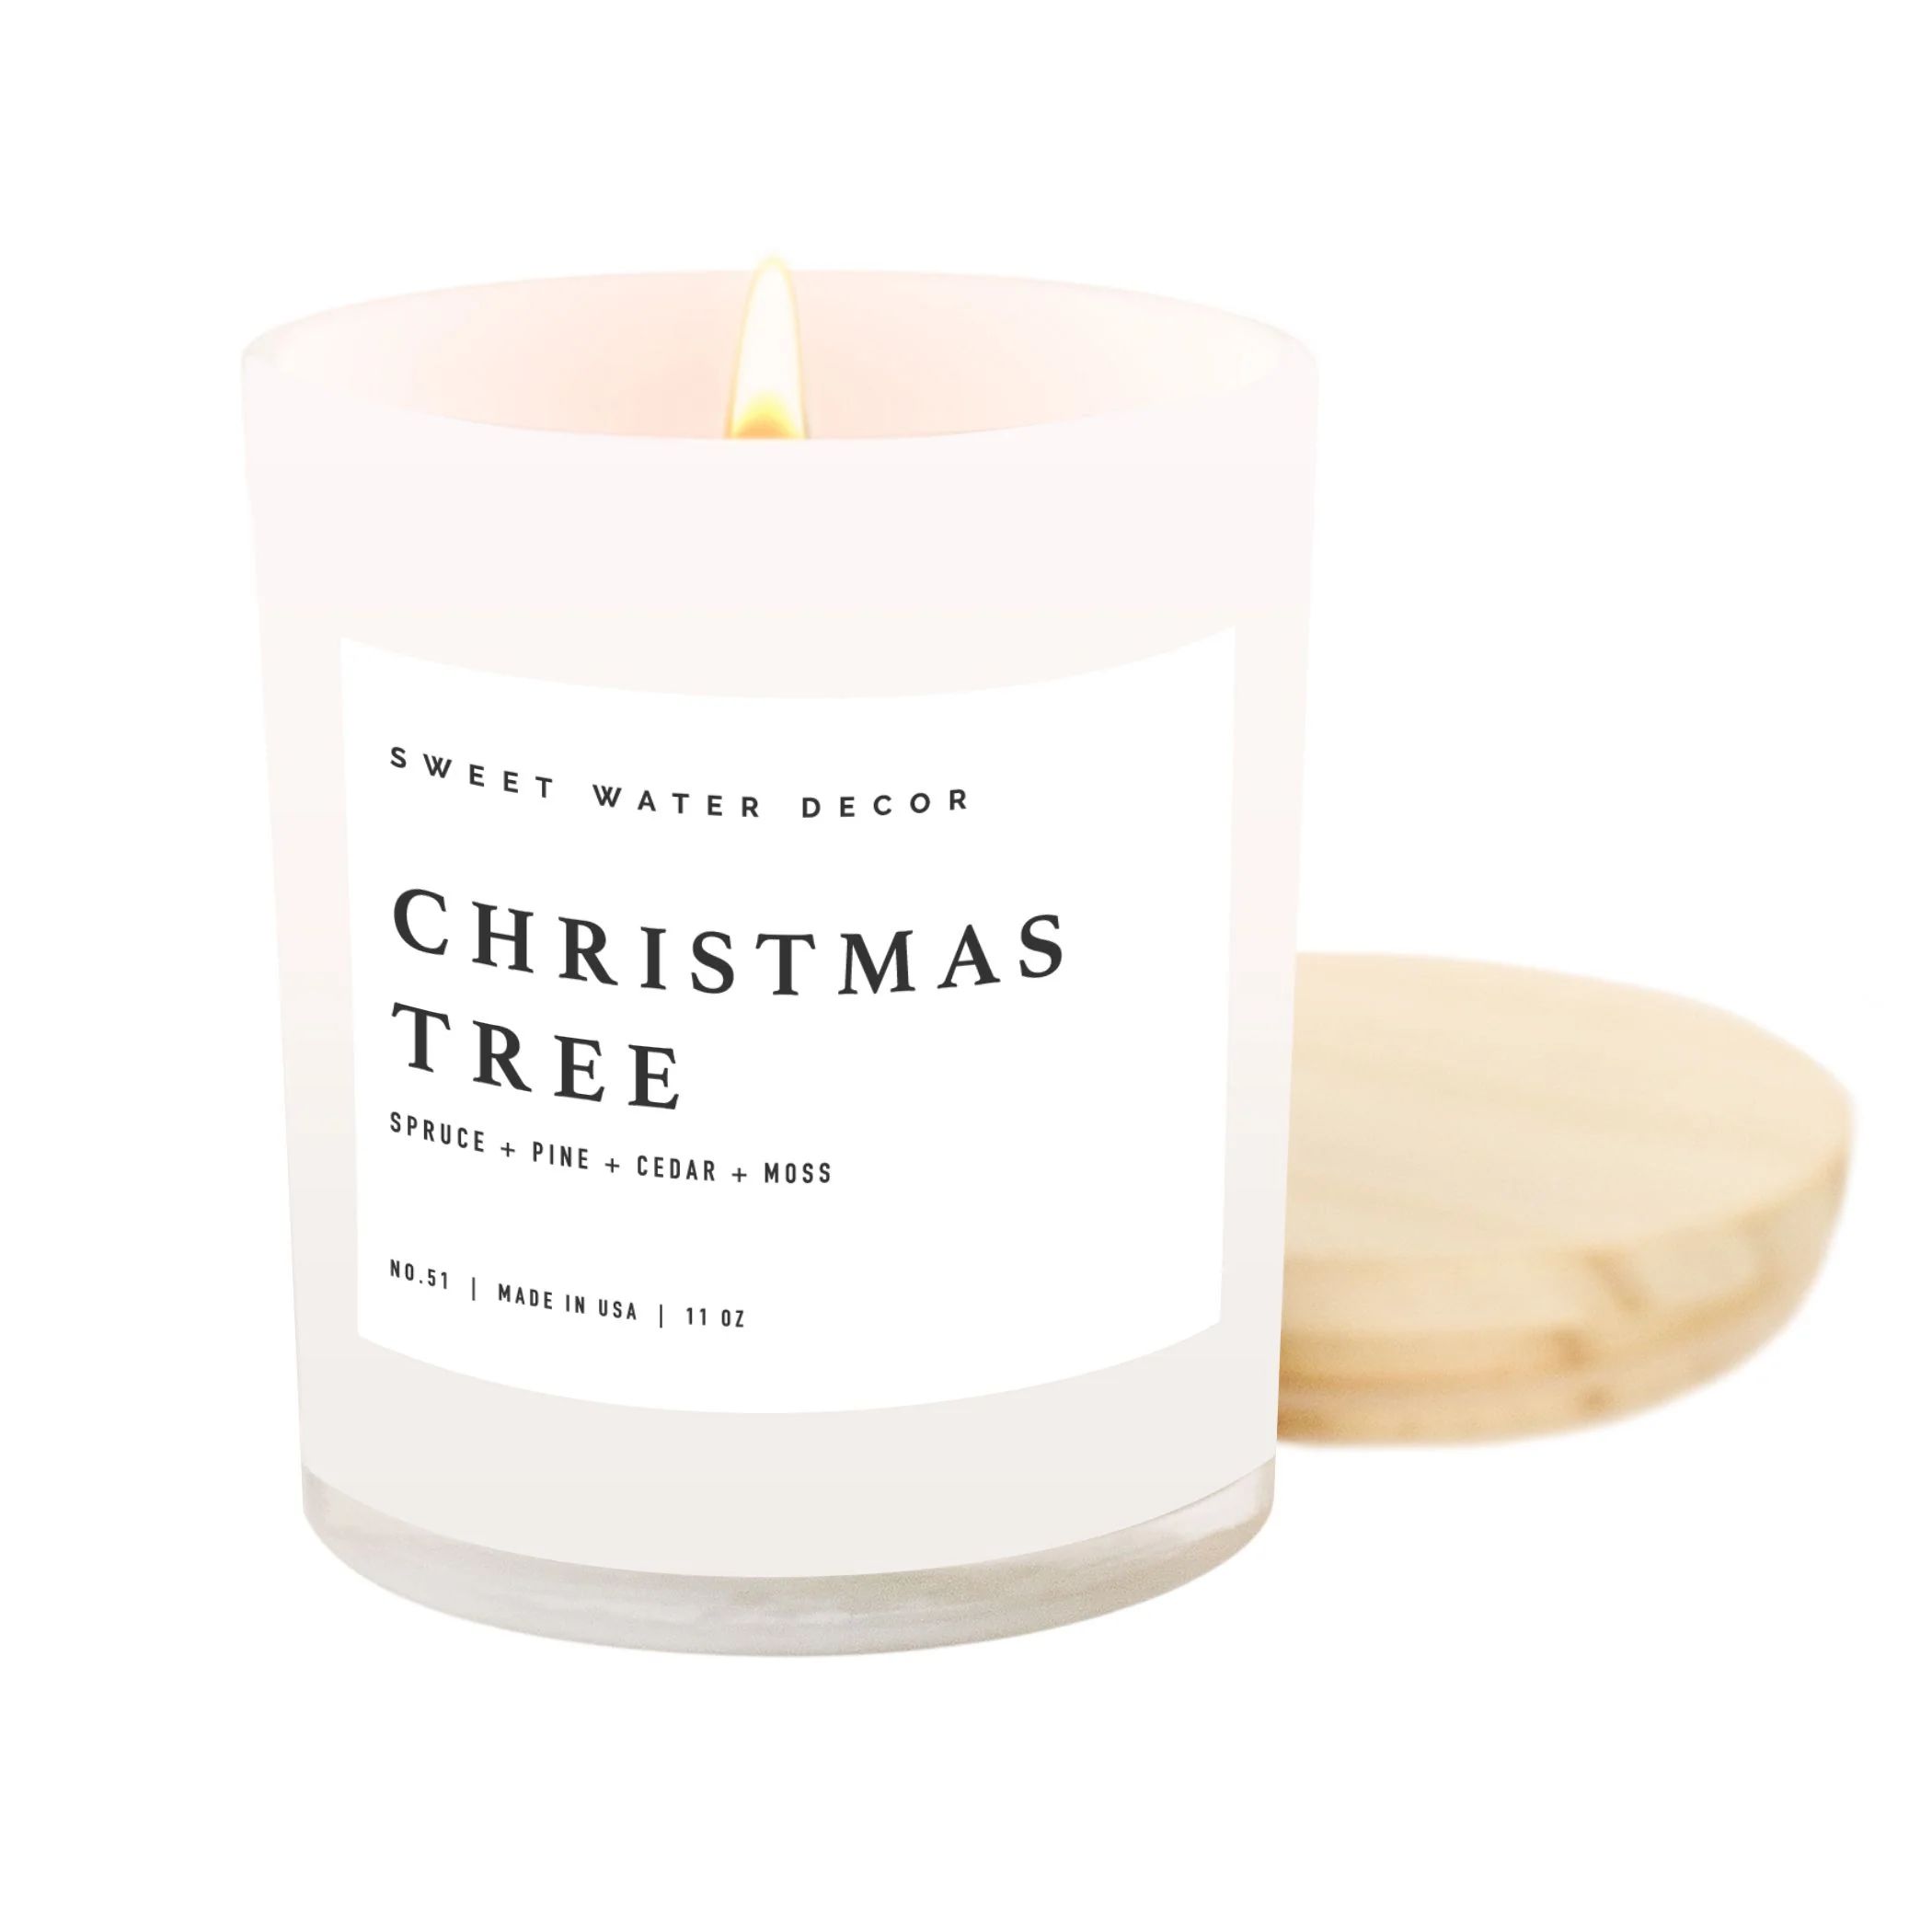 Christmas Tree Soy Candle | White Jar Candle + Wood Lid | Sweet Water Decor, LLC